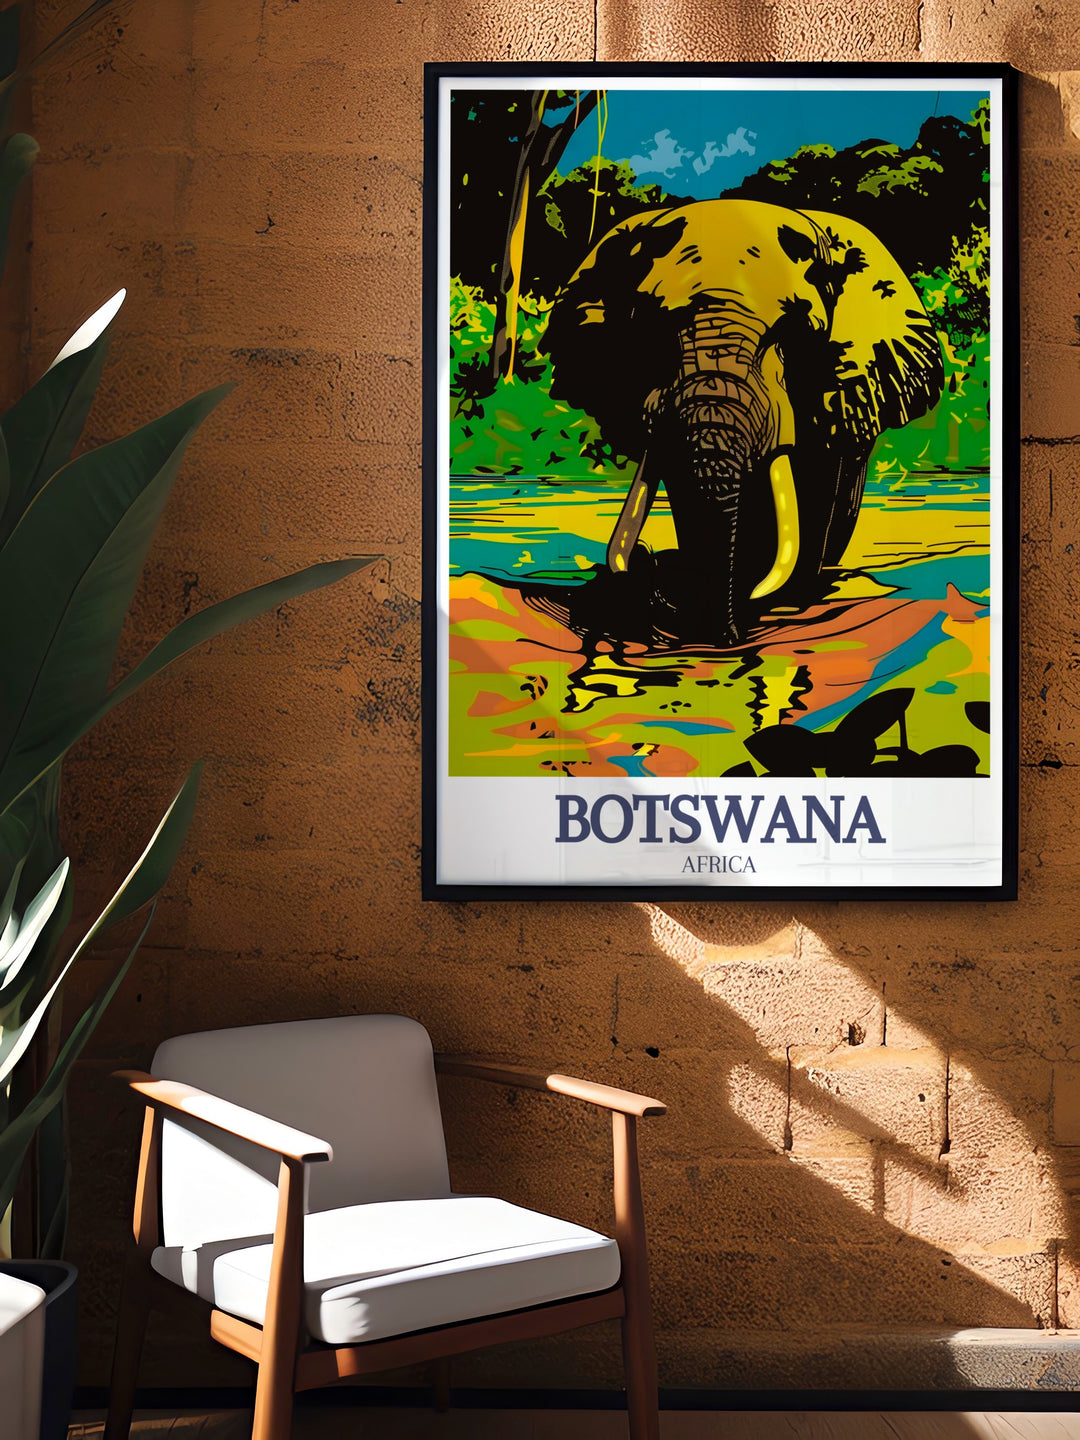 Okavango Delta and Moremi Game Reserve wall art for Botswana travel enthusiasts. Enjoy Botswana artwork that celebrates the majestic wildlife and lush landscapes of these renowned regions, perfect for any space in your home.